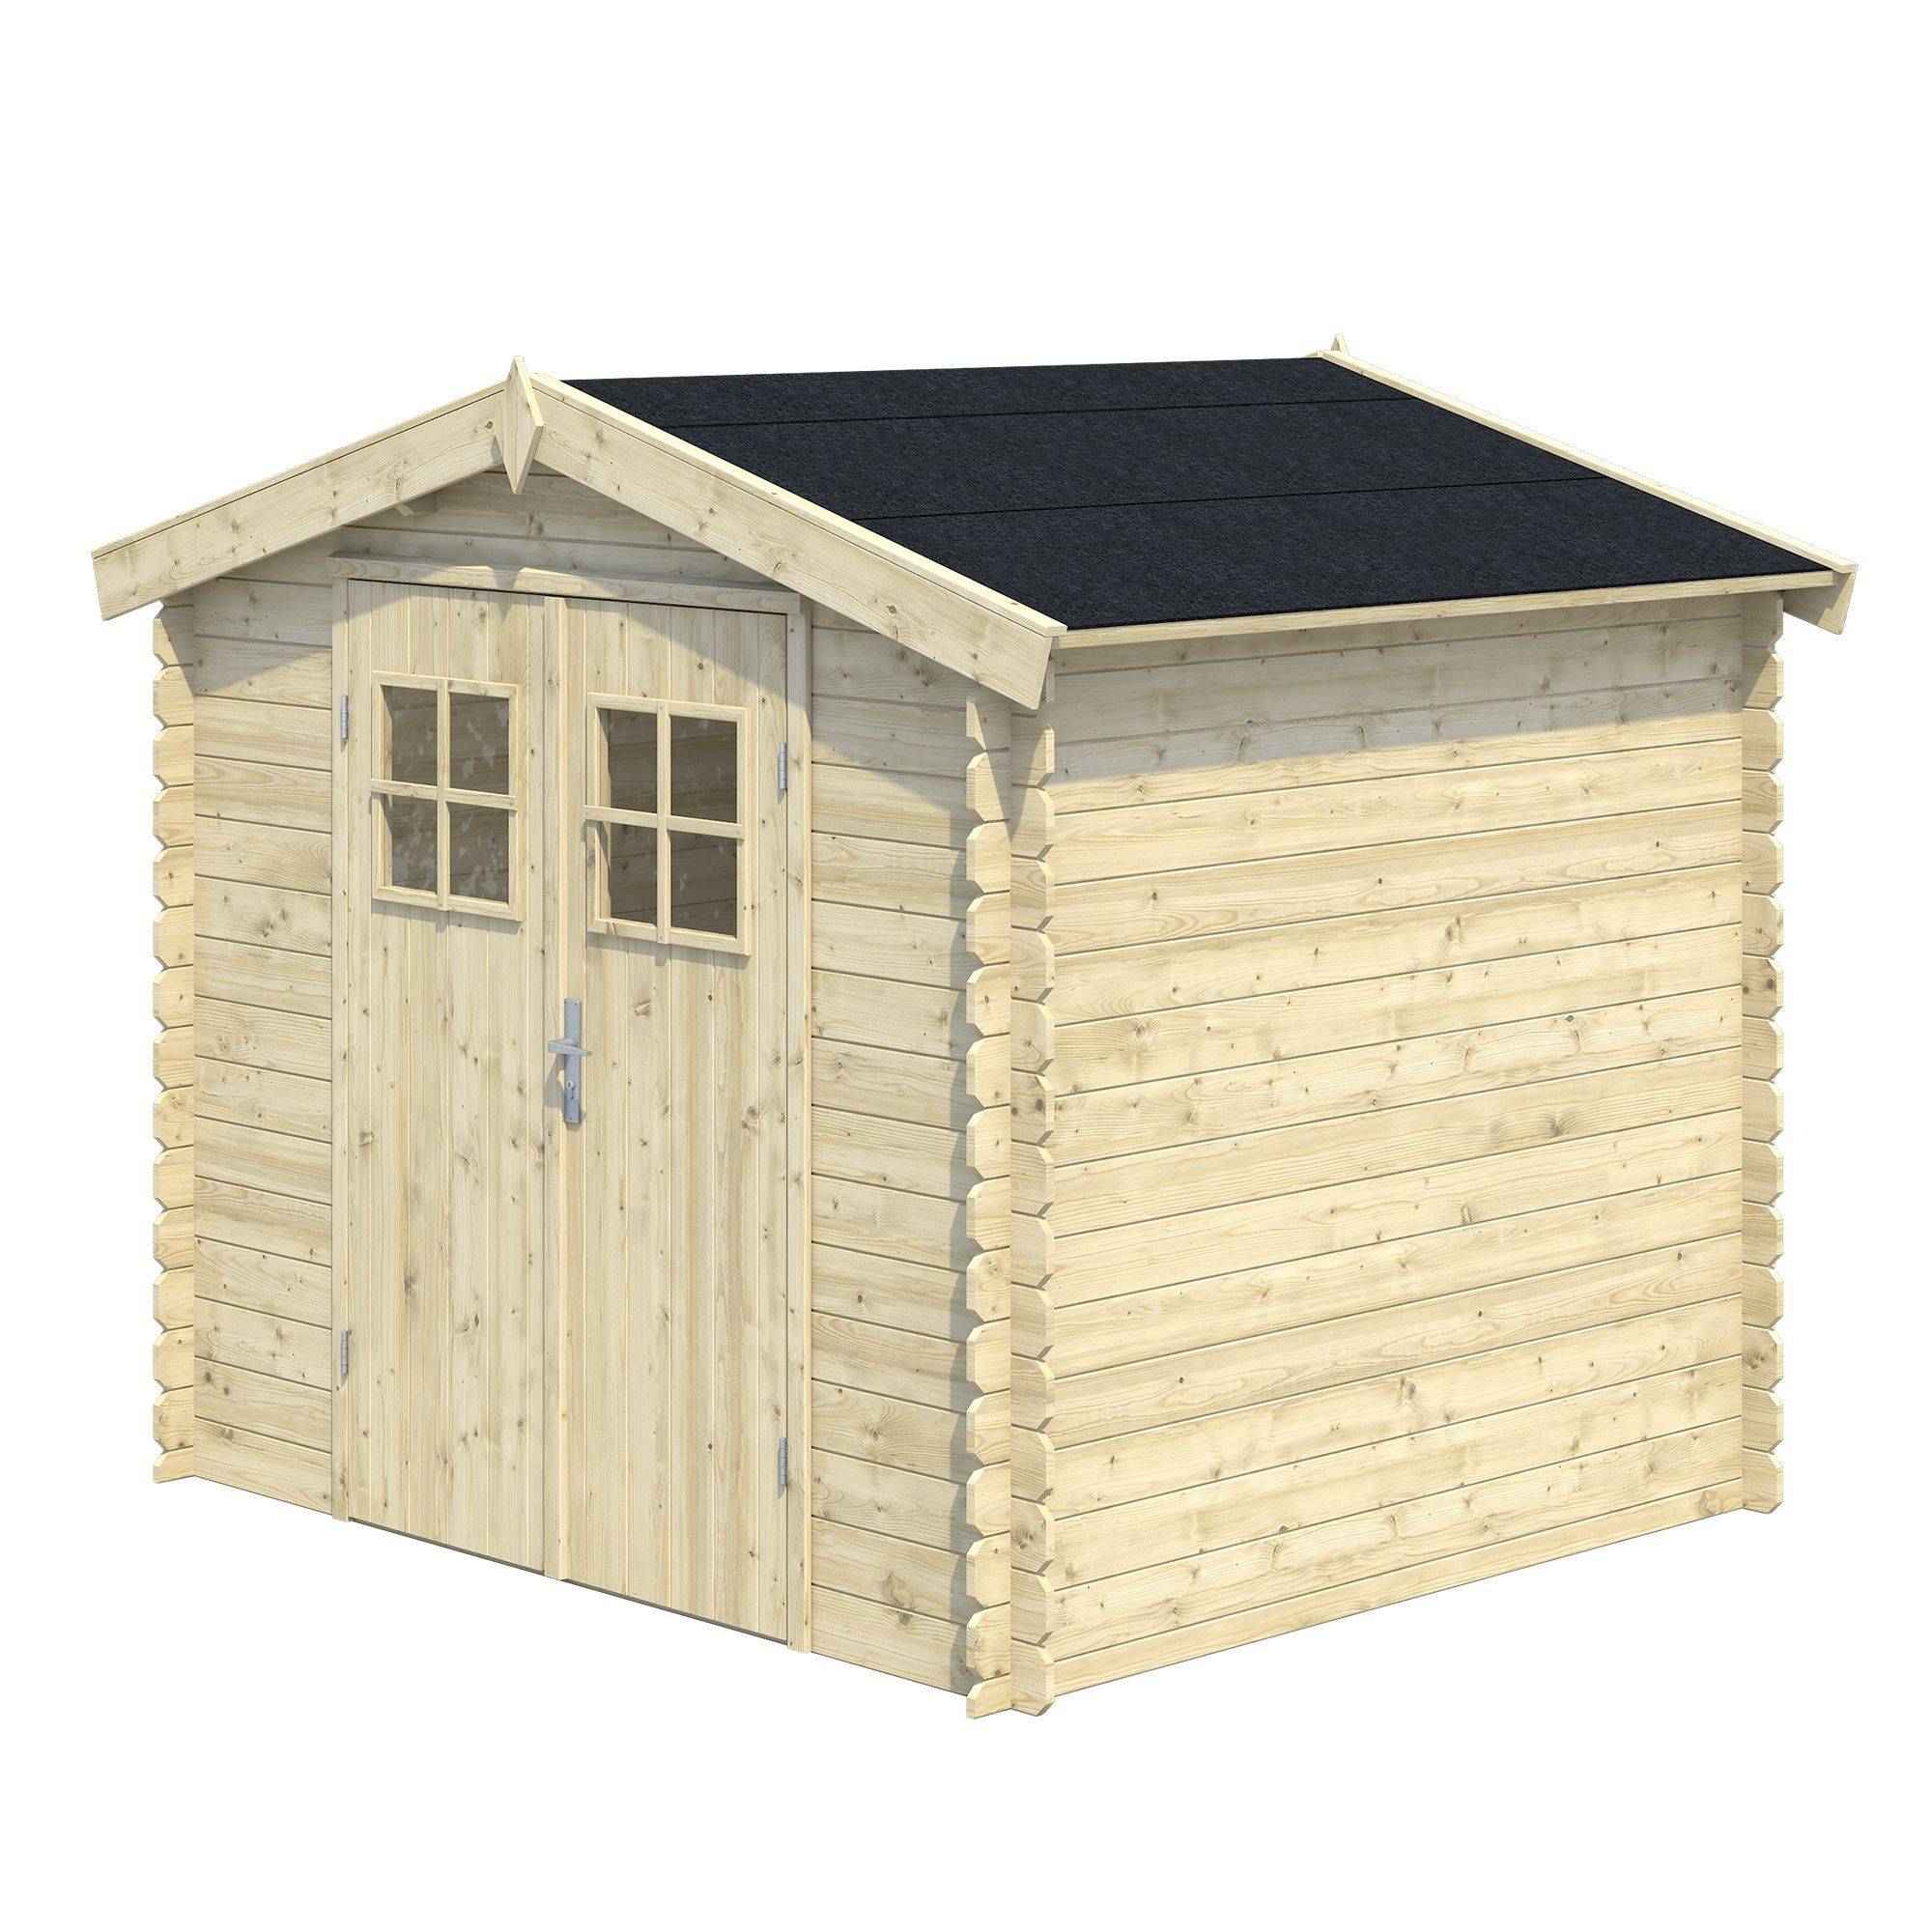 Blooma Mokau 7x6 Apex Tongue & groove Wooden Shed